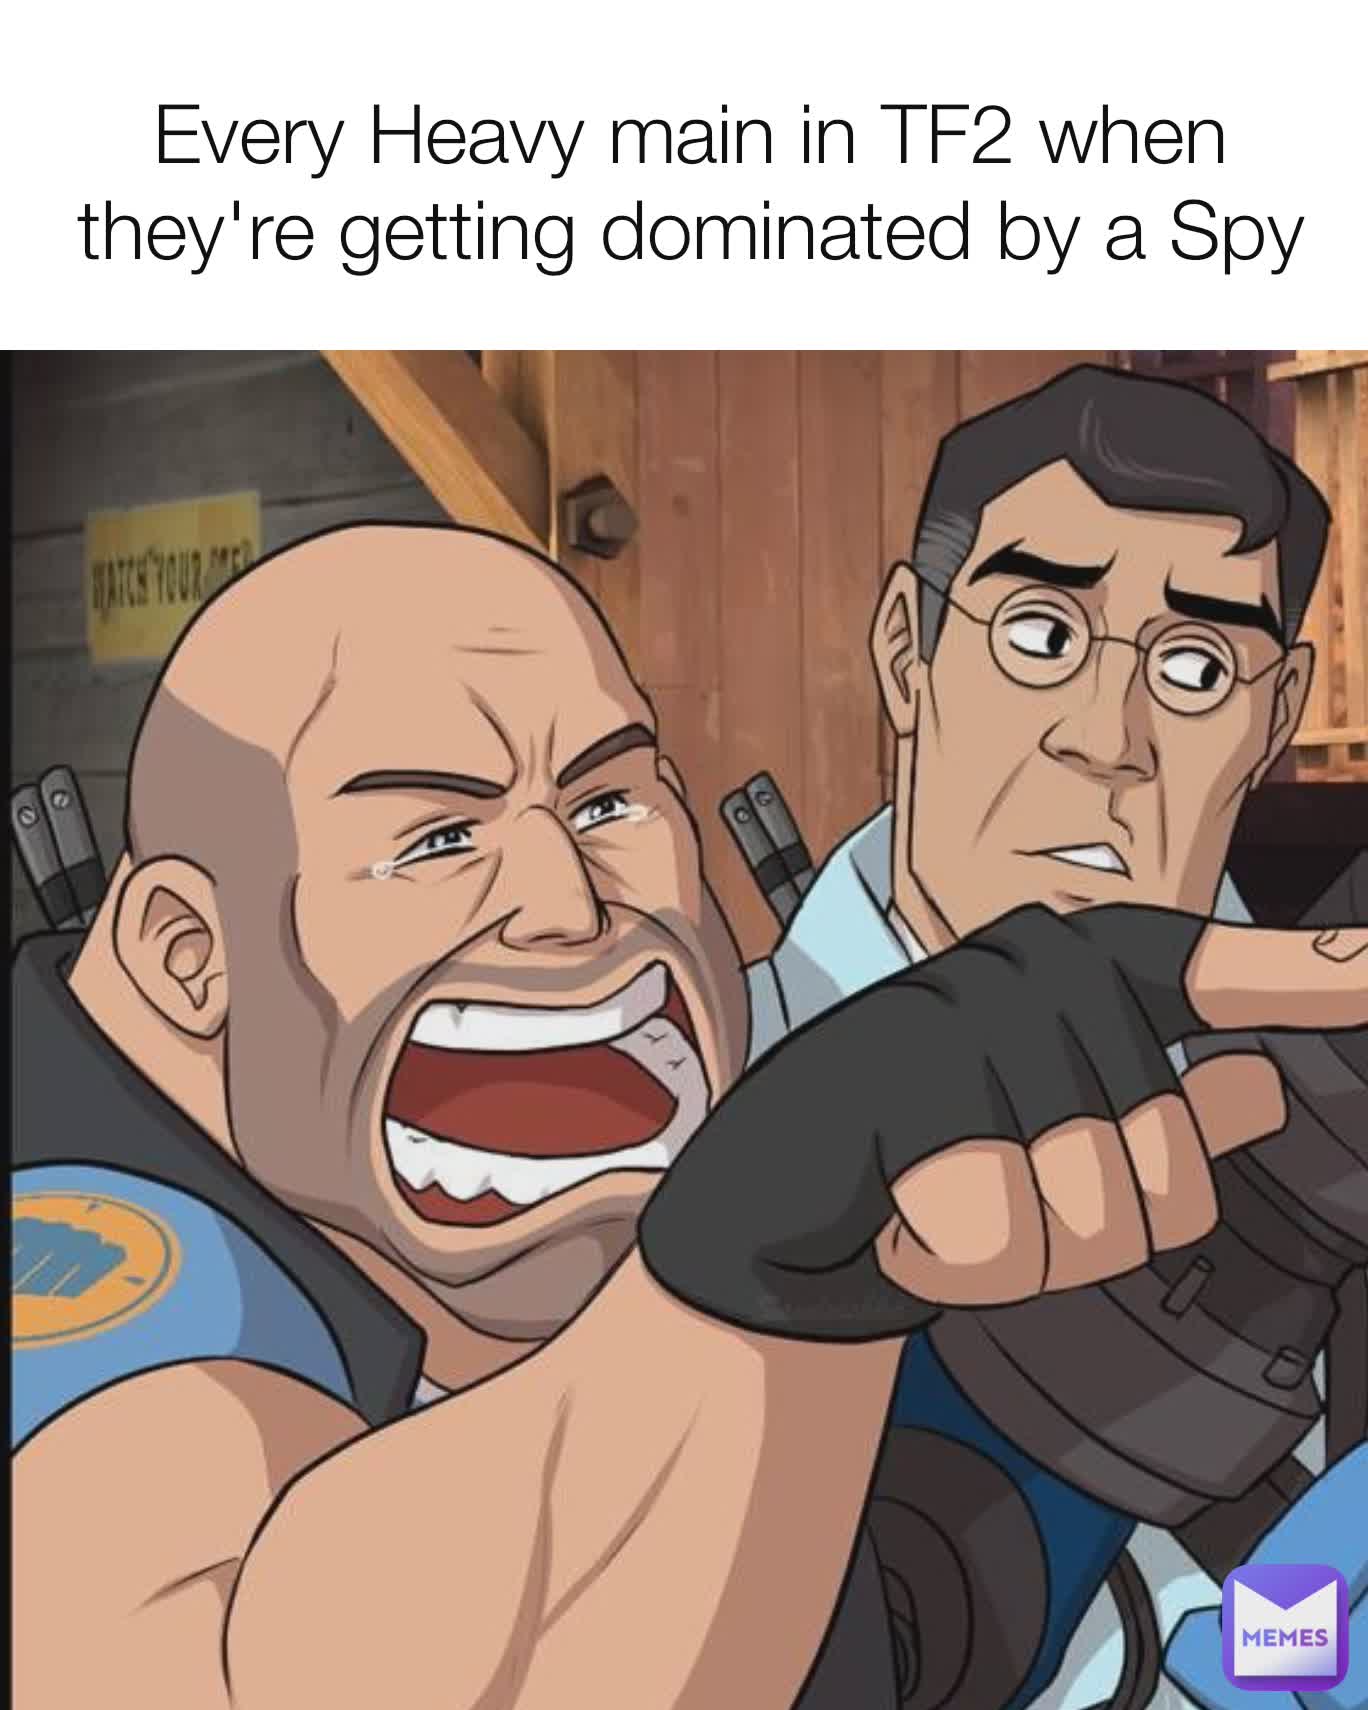 Every Heavy main in TF2 when they're getting dominated by a Spy